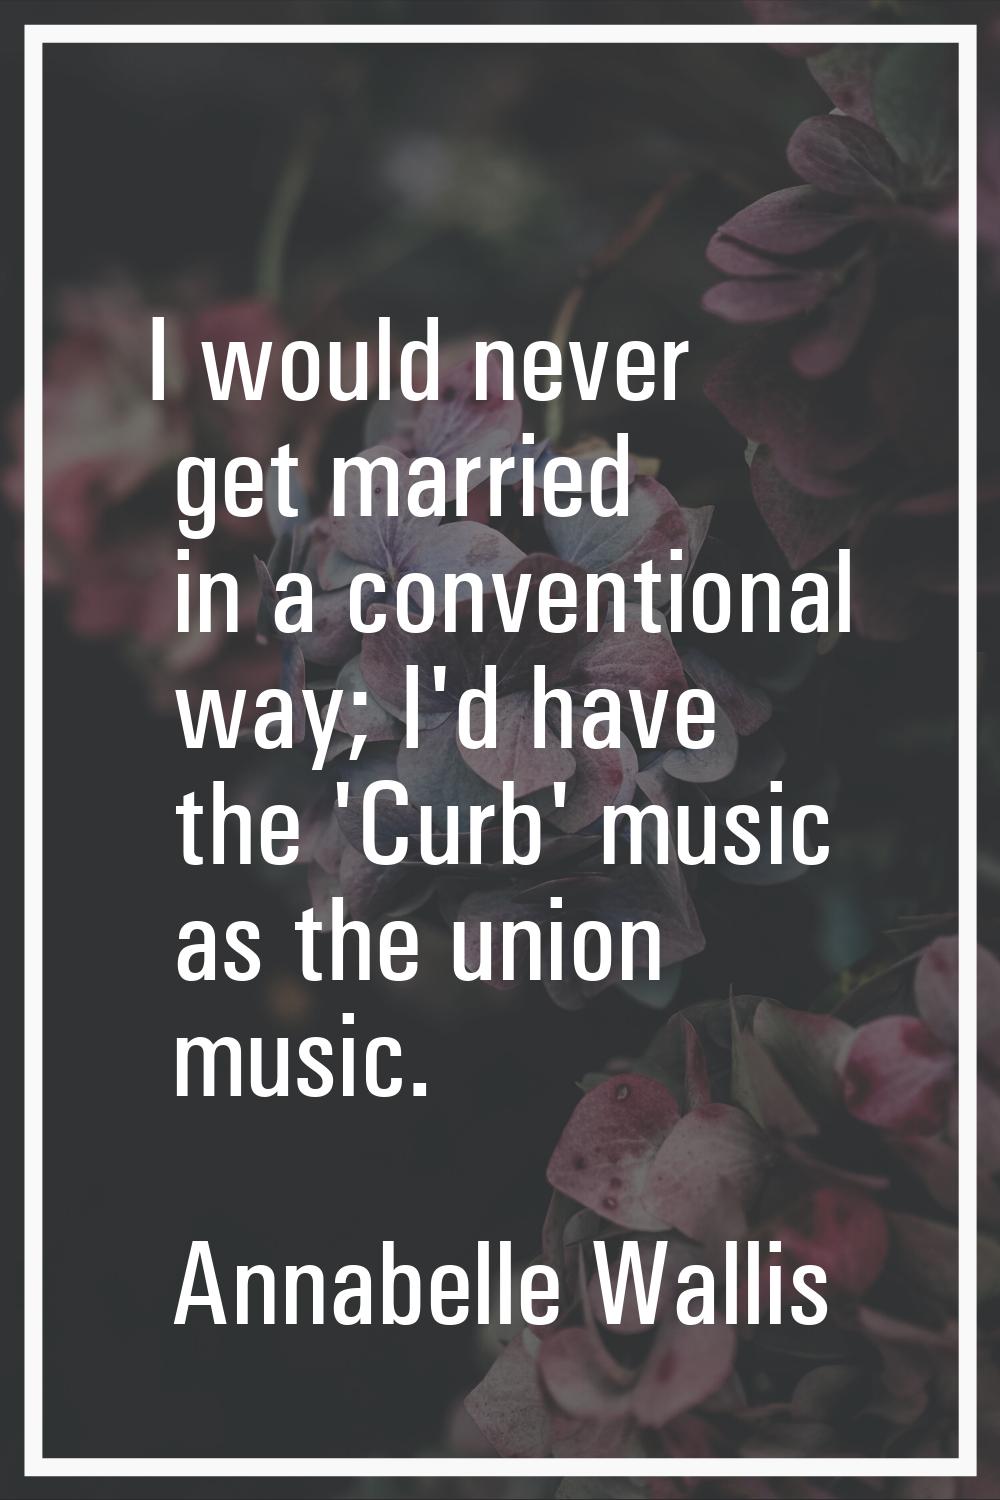 I would never get married in a conventional way; I'd have the 'Curb' music as the union music.